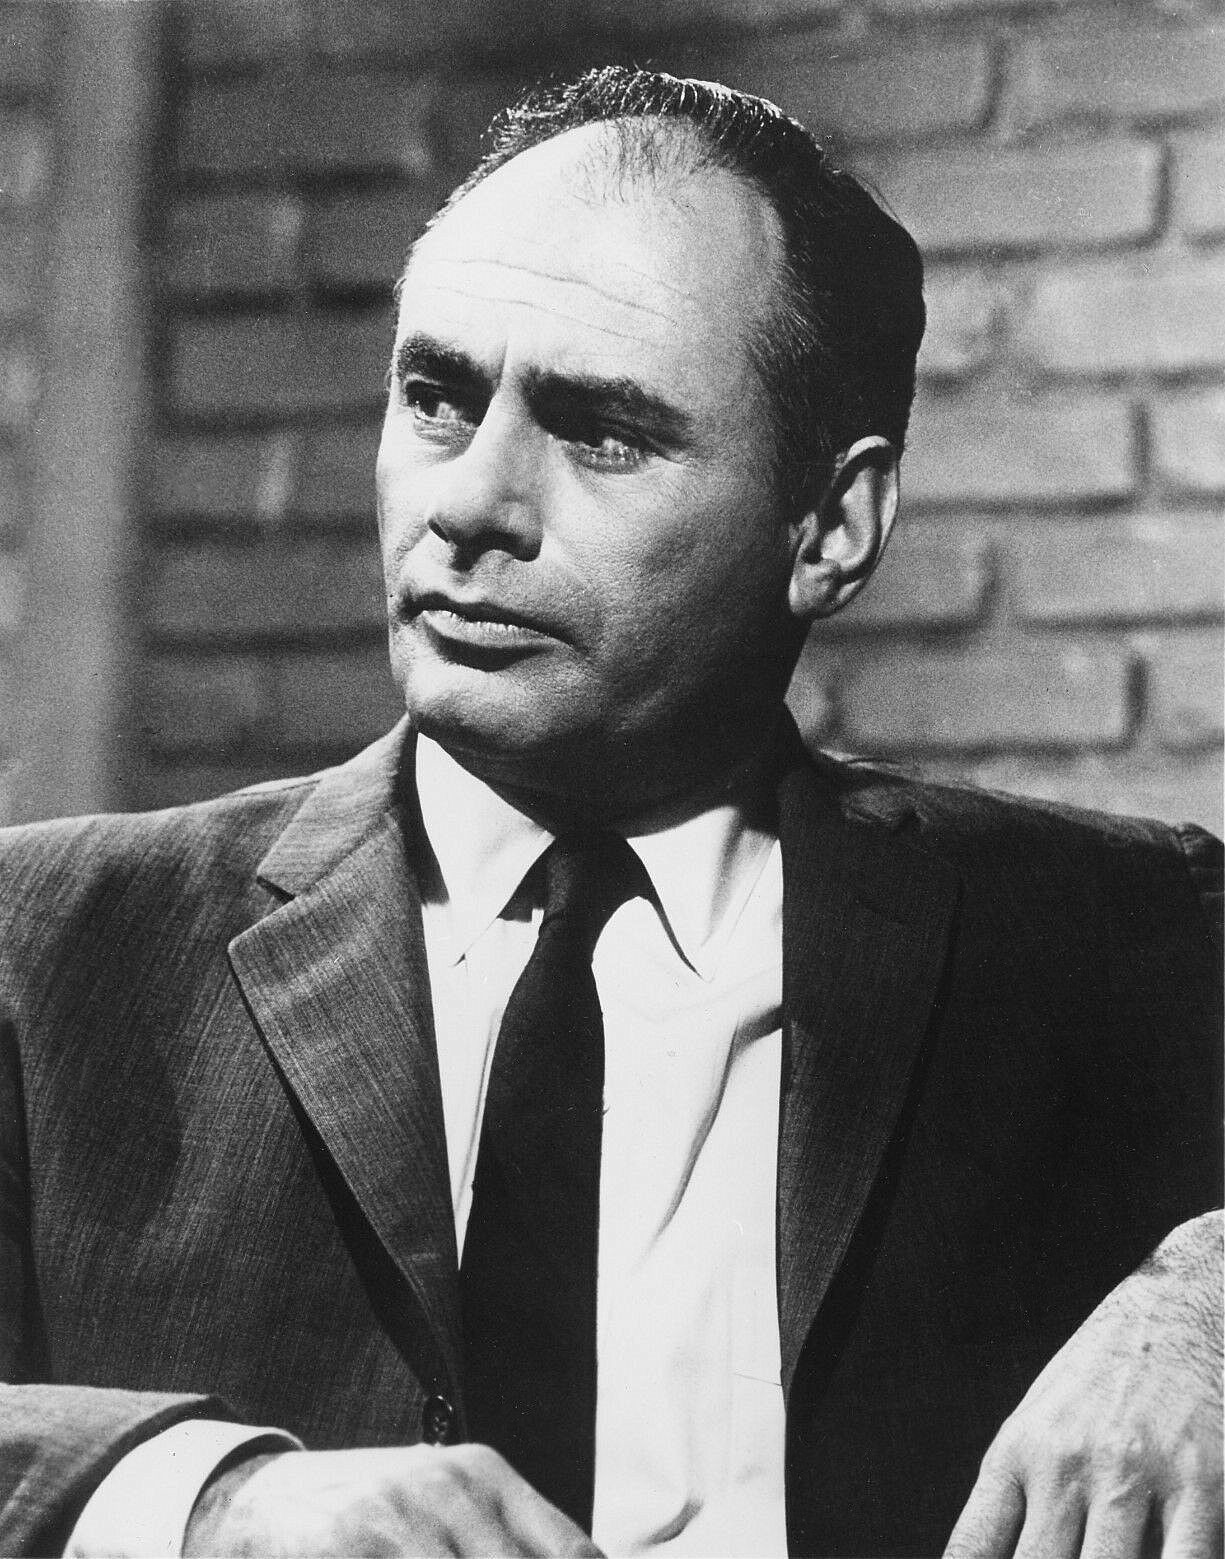 Balsam in the 1960s